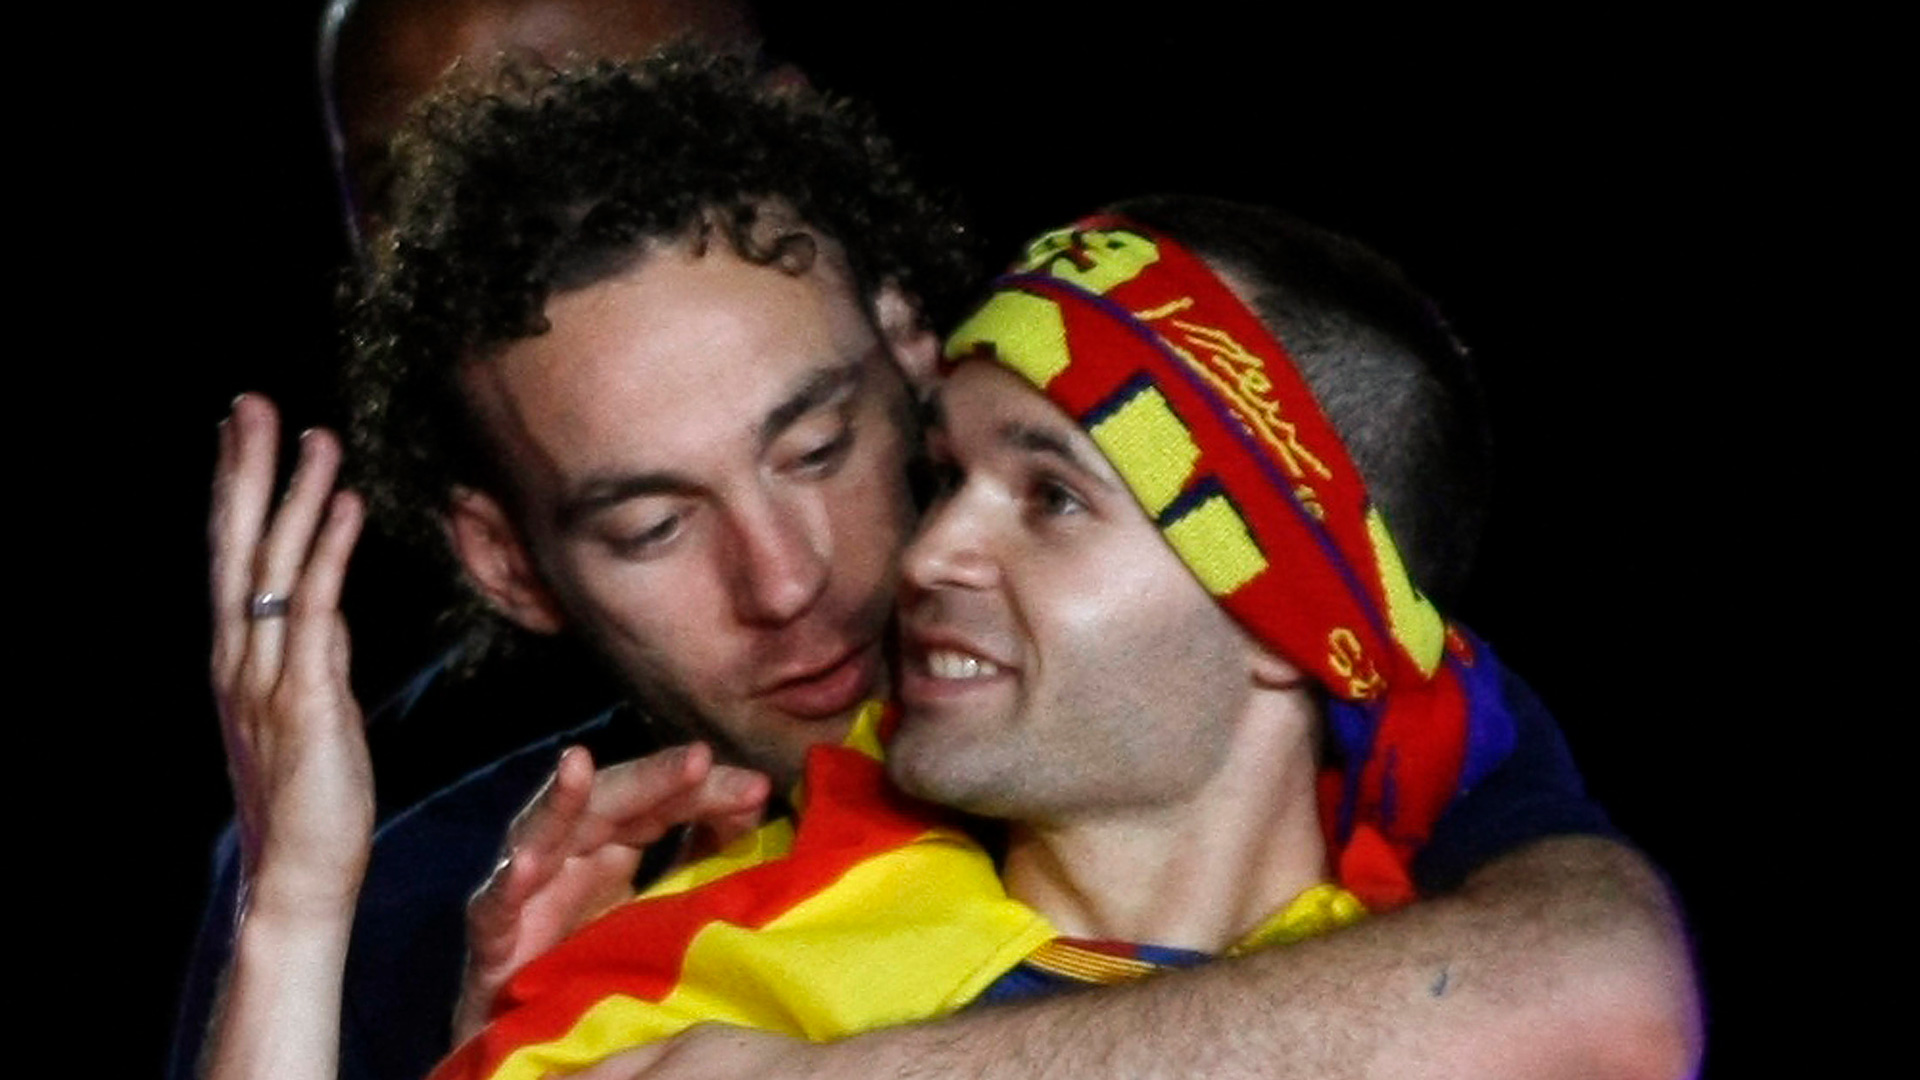 Barcelona soccer player Gabriel Milito (rear) embraces teammate Andres Iniesta during celebrations for their Champions League victory at Nou Camp stadium in Barcelona May 28, 2009. Barcelona beat Manchester United 2-0 in their Champions League soccer final in Rome on Wednesday. REUTERS/Albert Gea (SPAIN SPORT SOCCER)